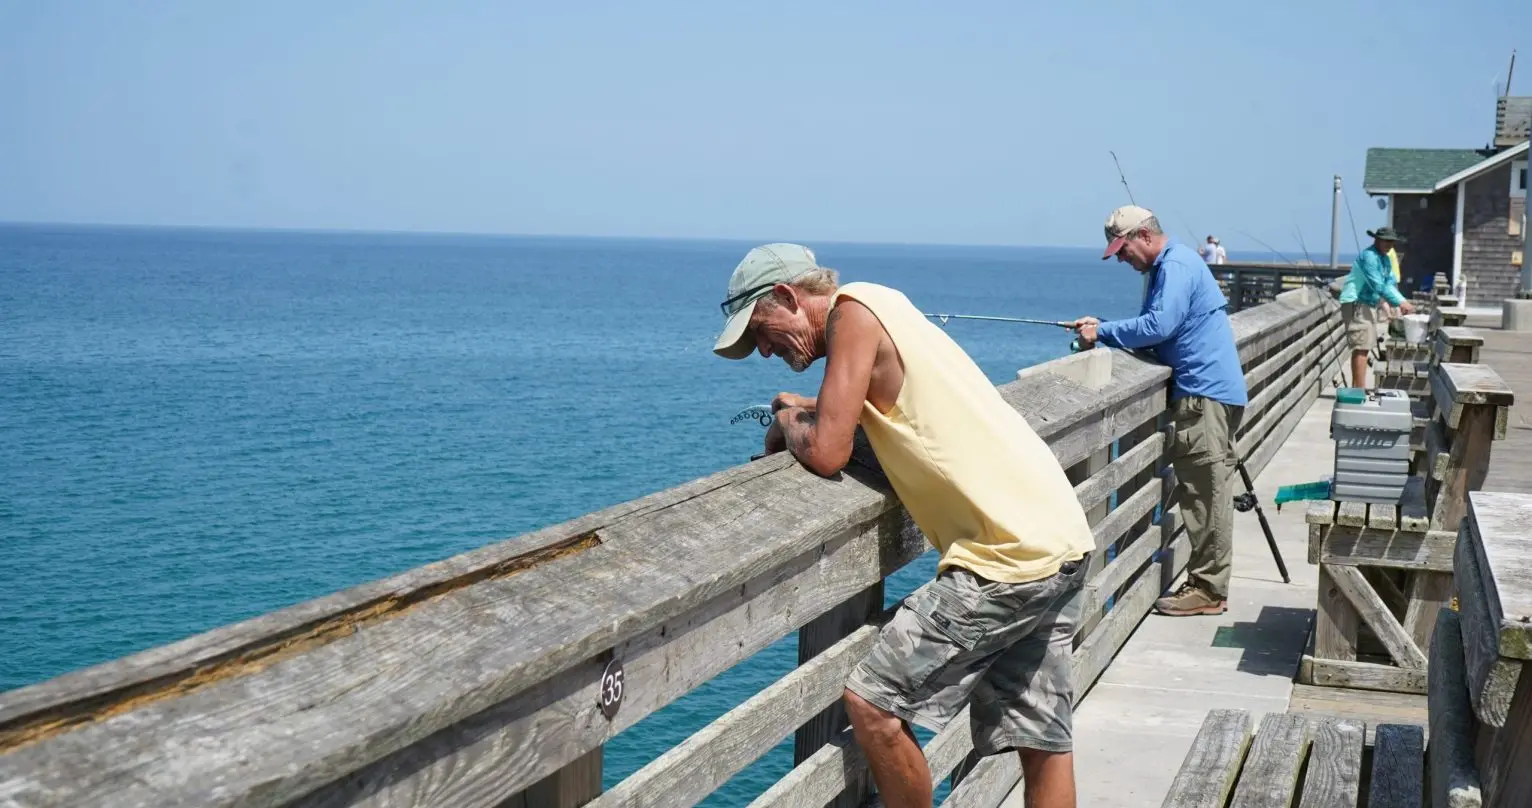 Men look out on fishing pier